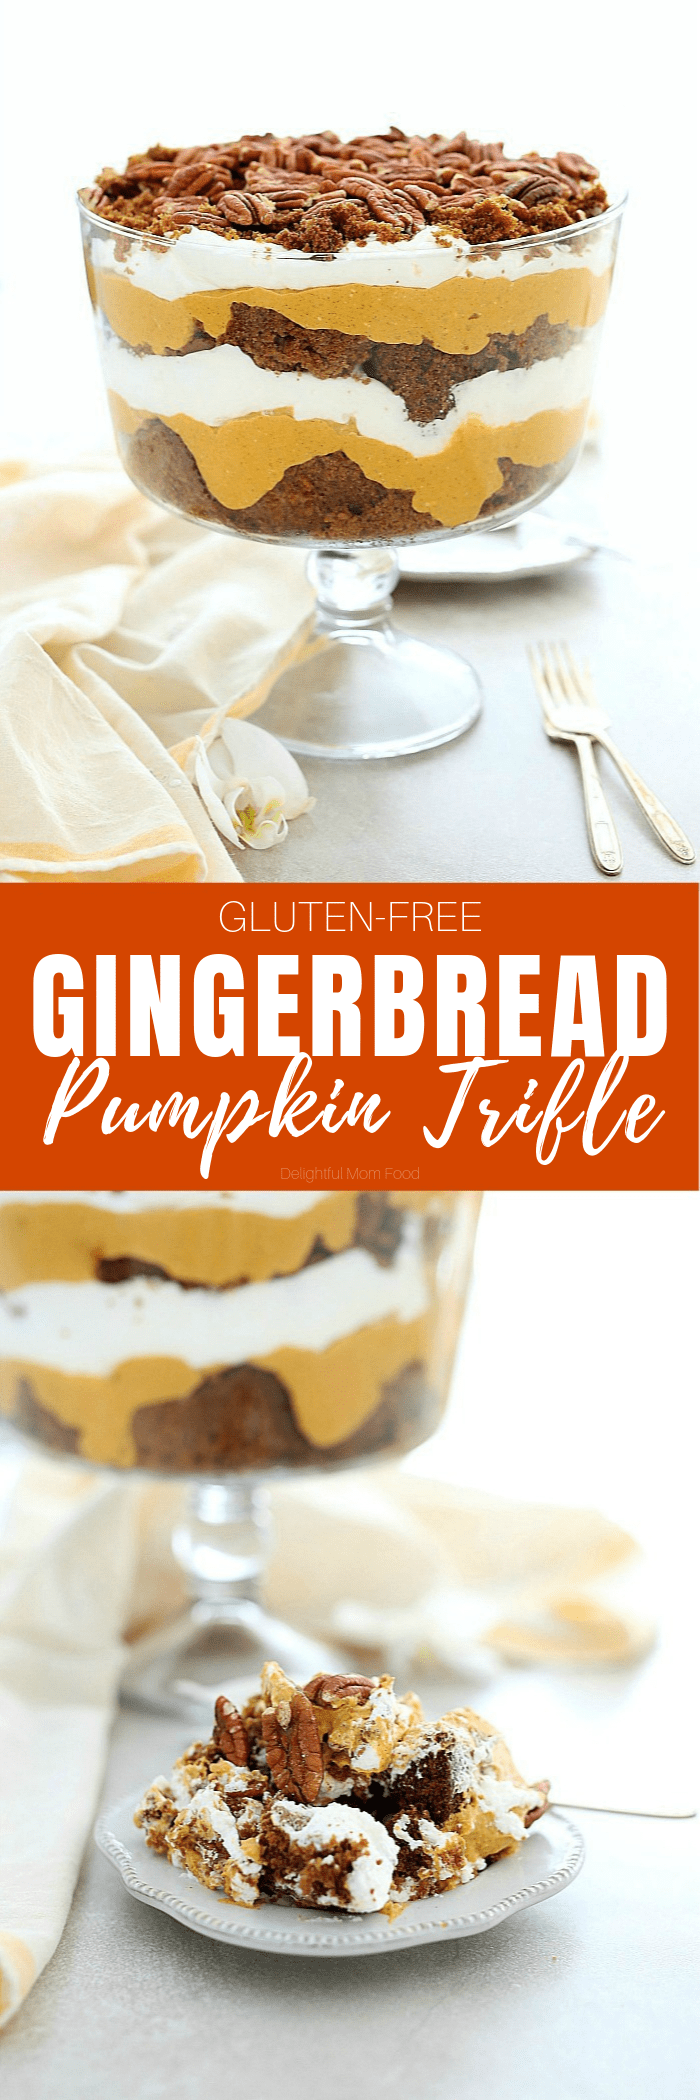 A tasty pumpkin trifle layered with gluten-free gingerbread cake, creamy pumpkin filling and homemade whipped cream. A favorite holiday dessert! #dessert #holiday #Thanksgiving #Christmas #pumpkin #trifle #gingerbread #glutenfree #recipe | Delightful Mom Food